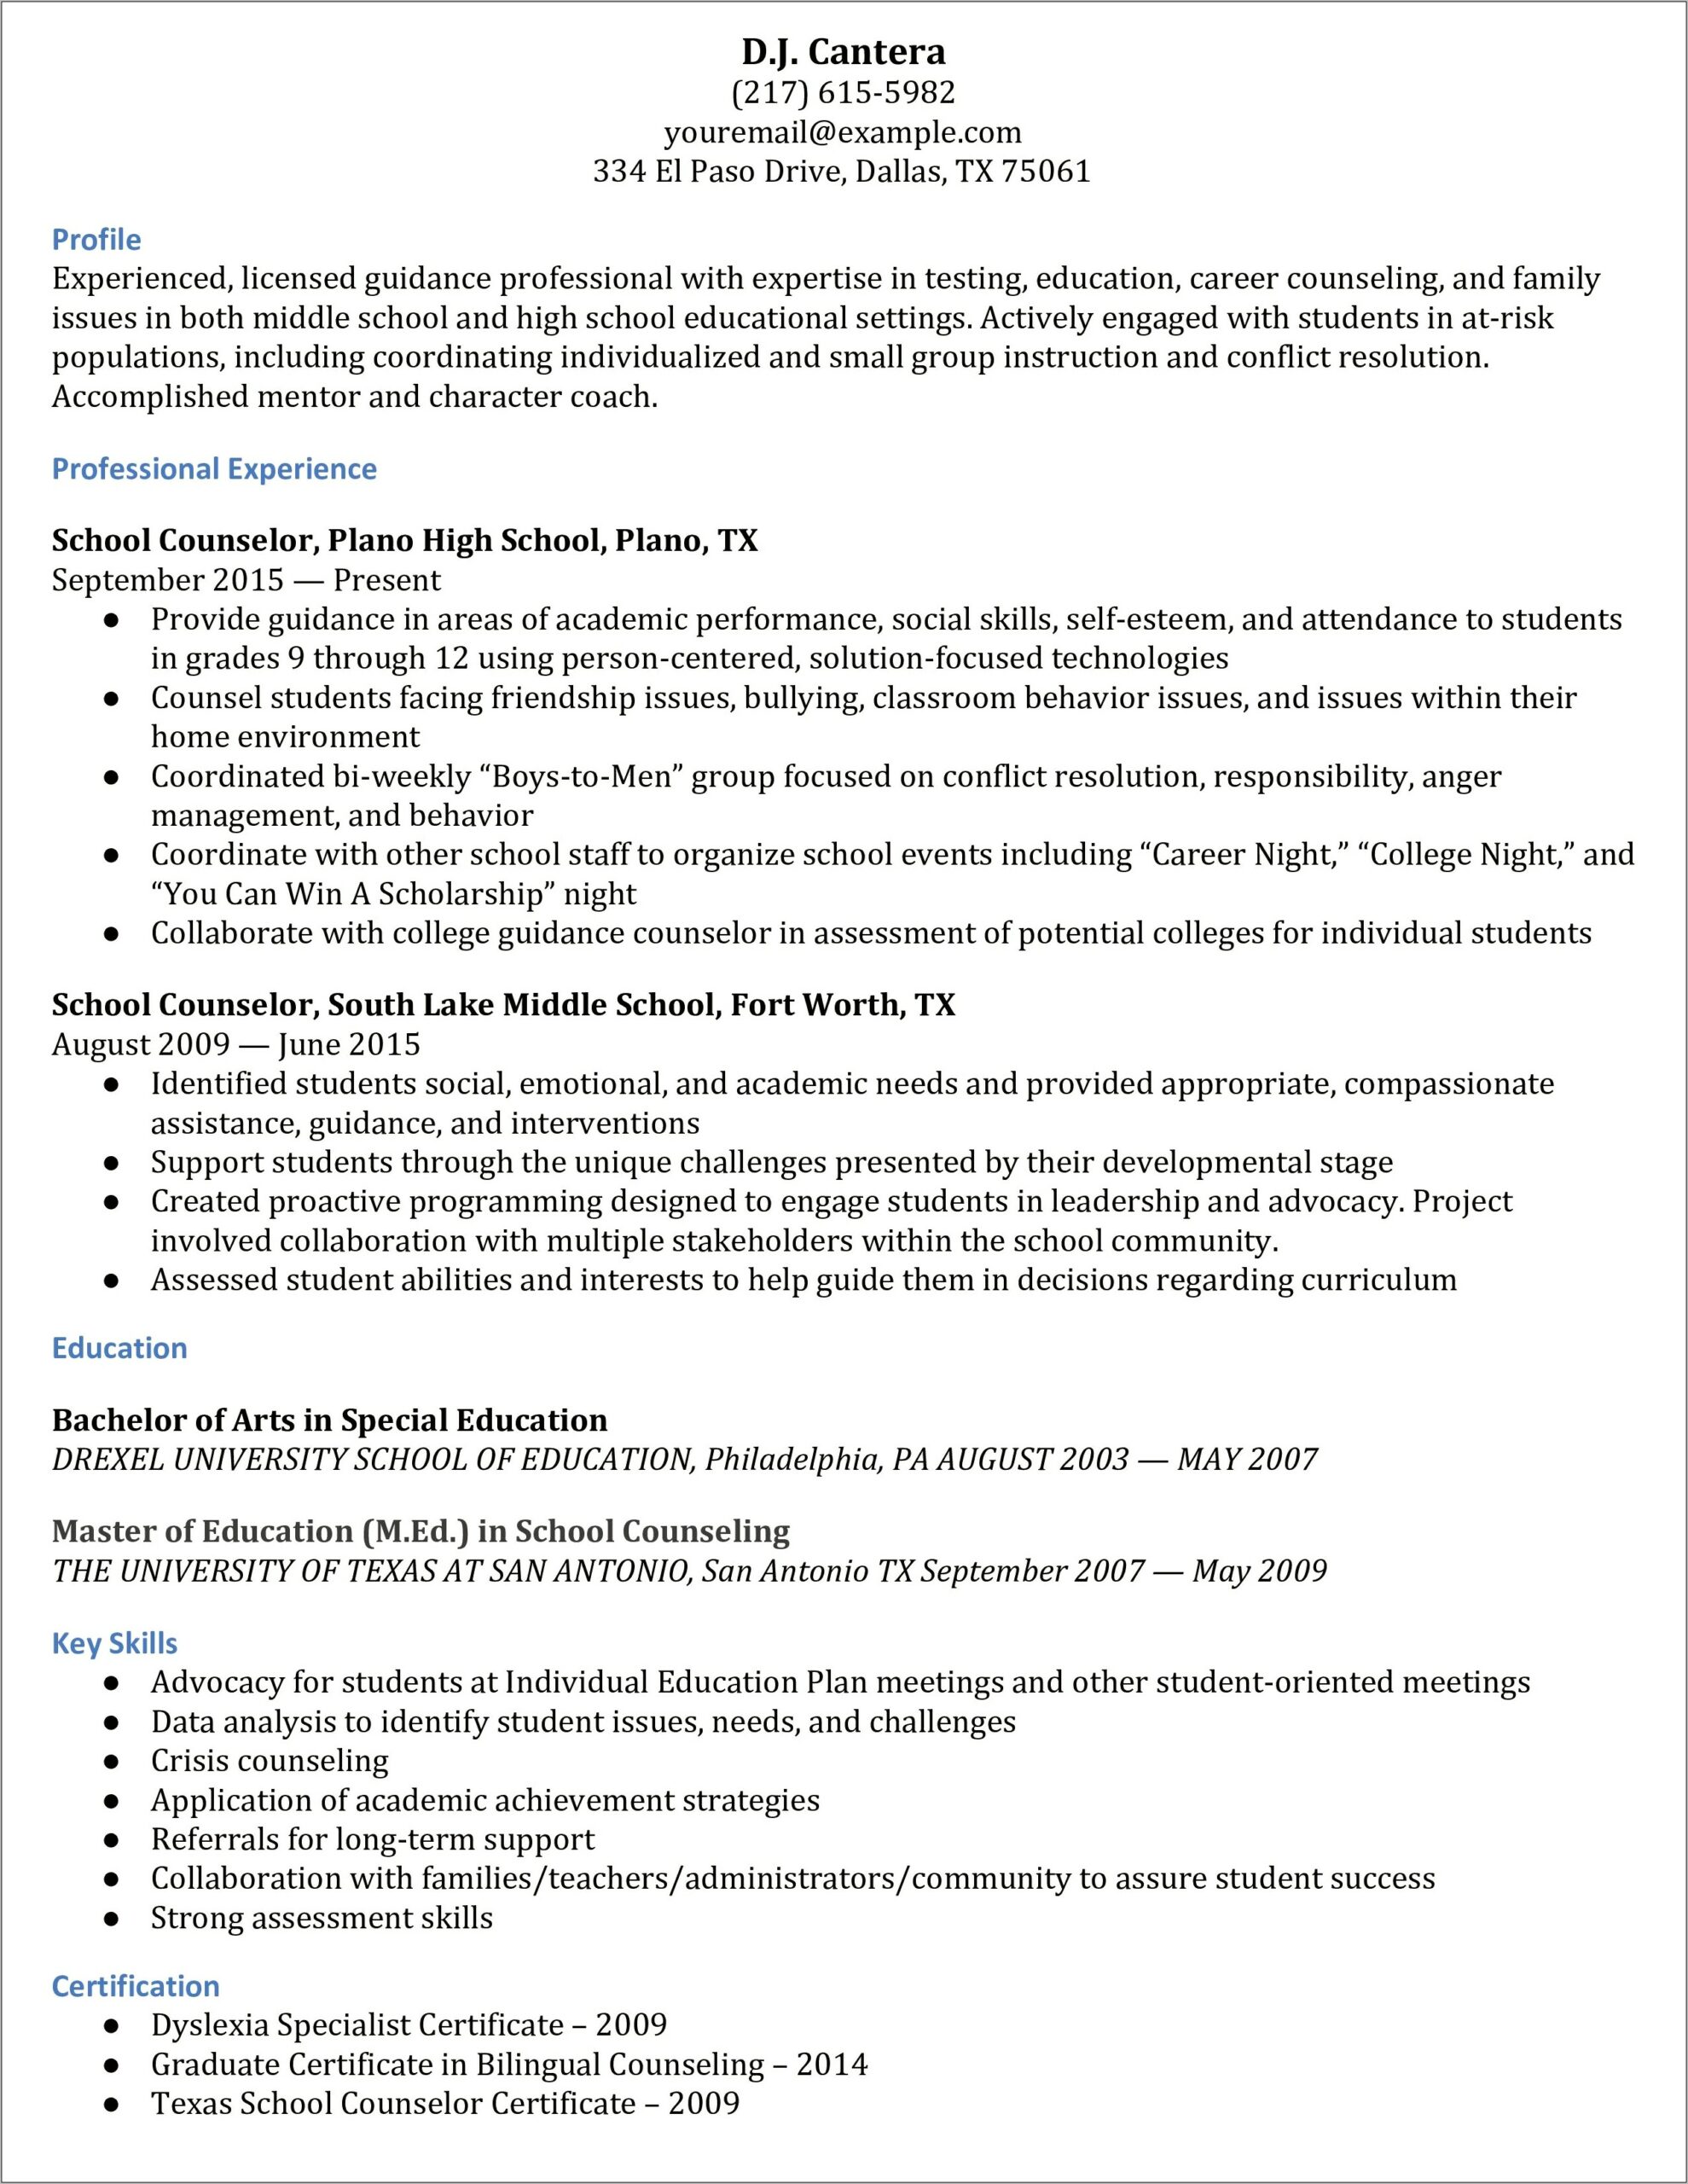 Examples Of Peer Support Specialist Resumes